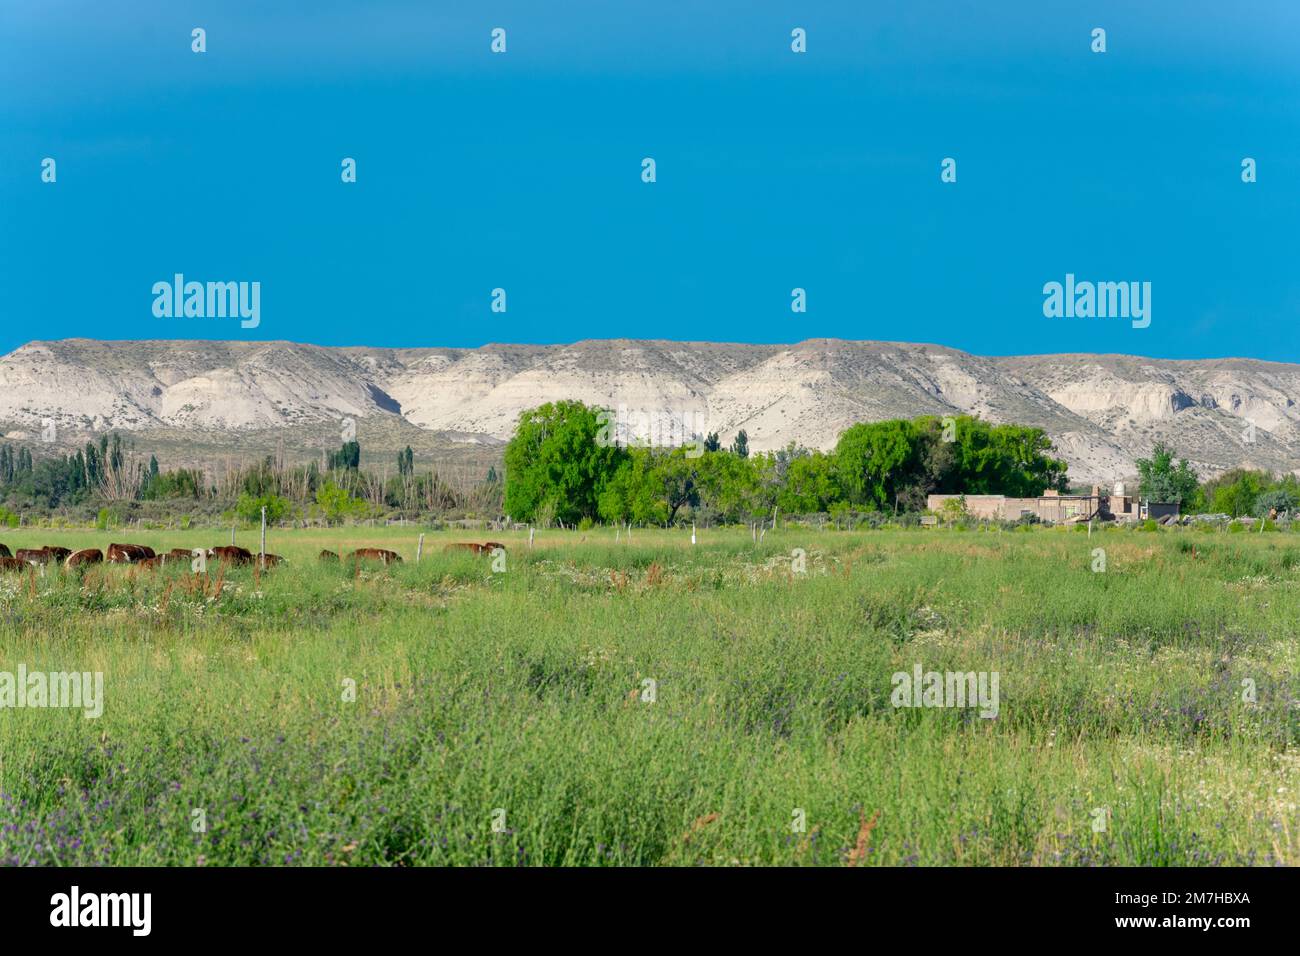 Countryside Landscape near Trelew. Province of Chubut, Argentina Stock Photo